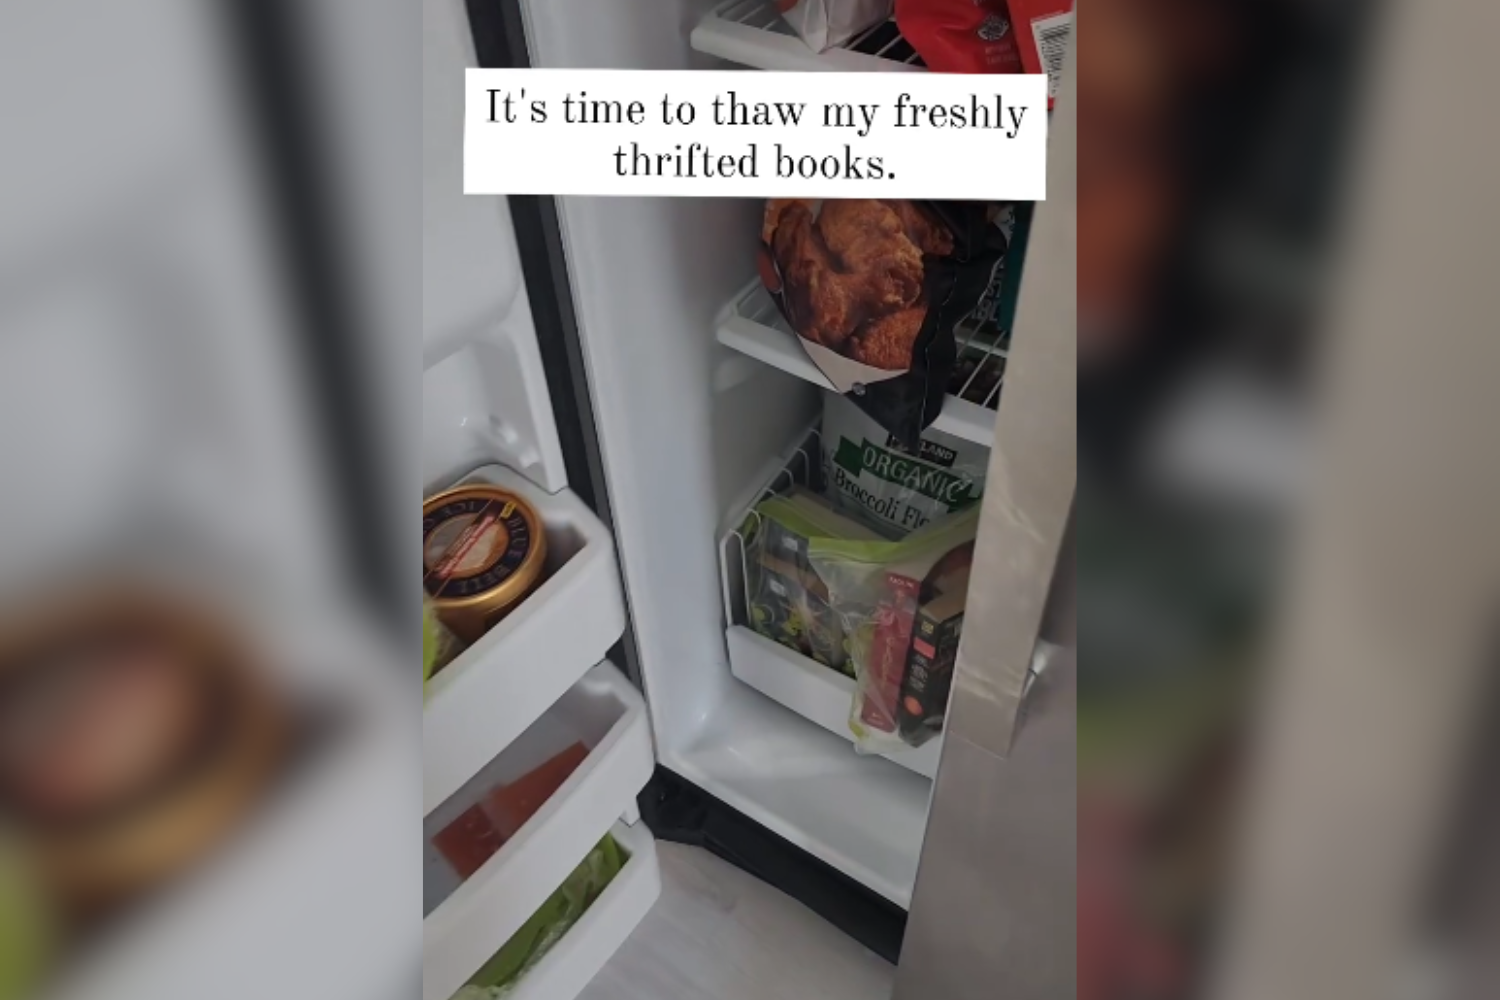 Woman explains why she immediately puts used books in the freezer